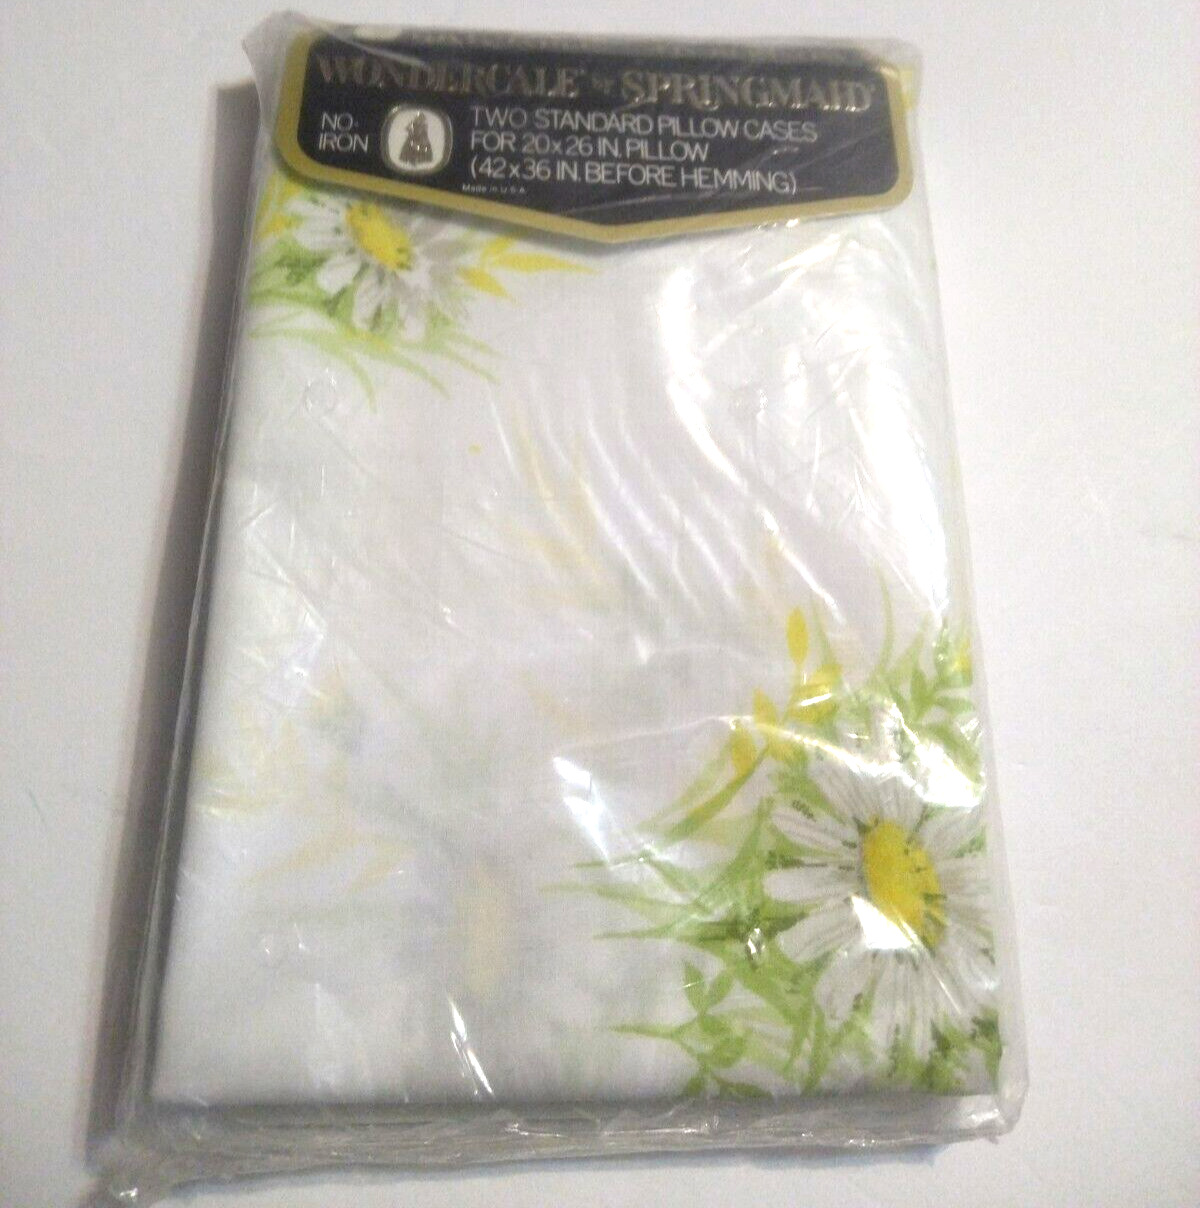 Vintage NOS Wondercale By Springmaid Two Standard Daisy Print Pillow Cases